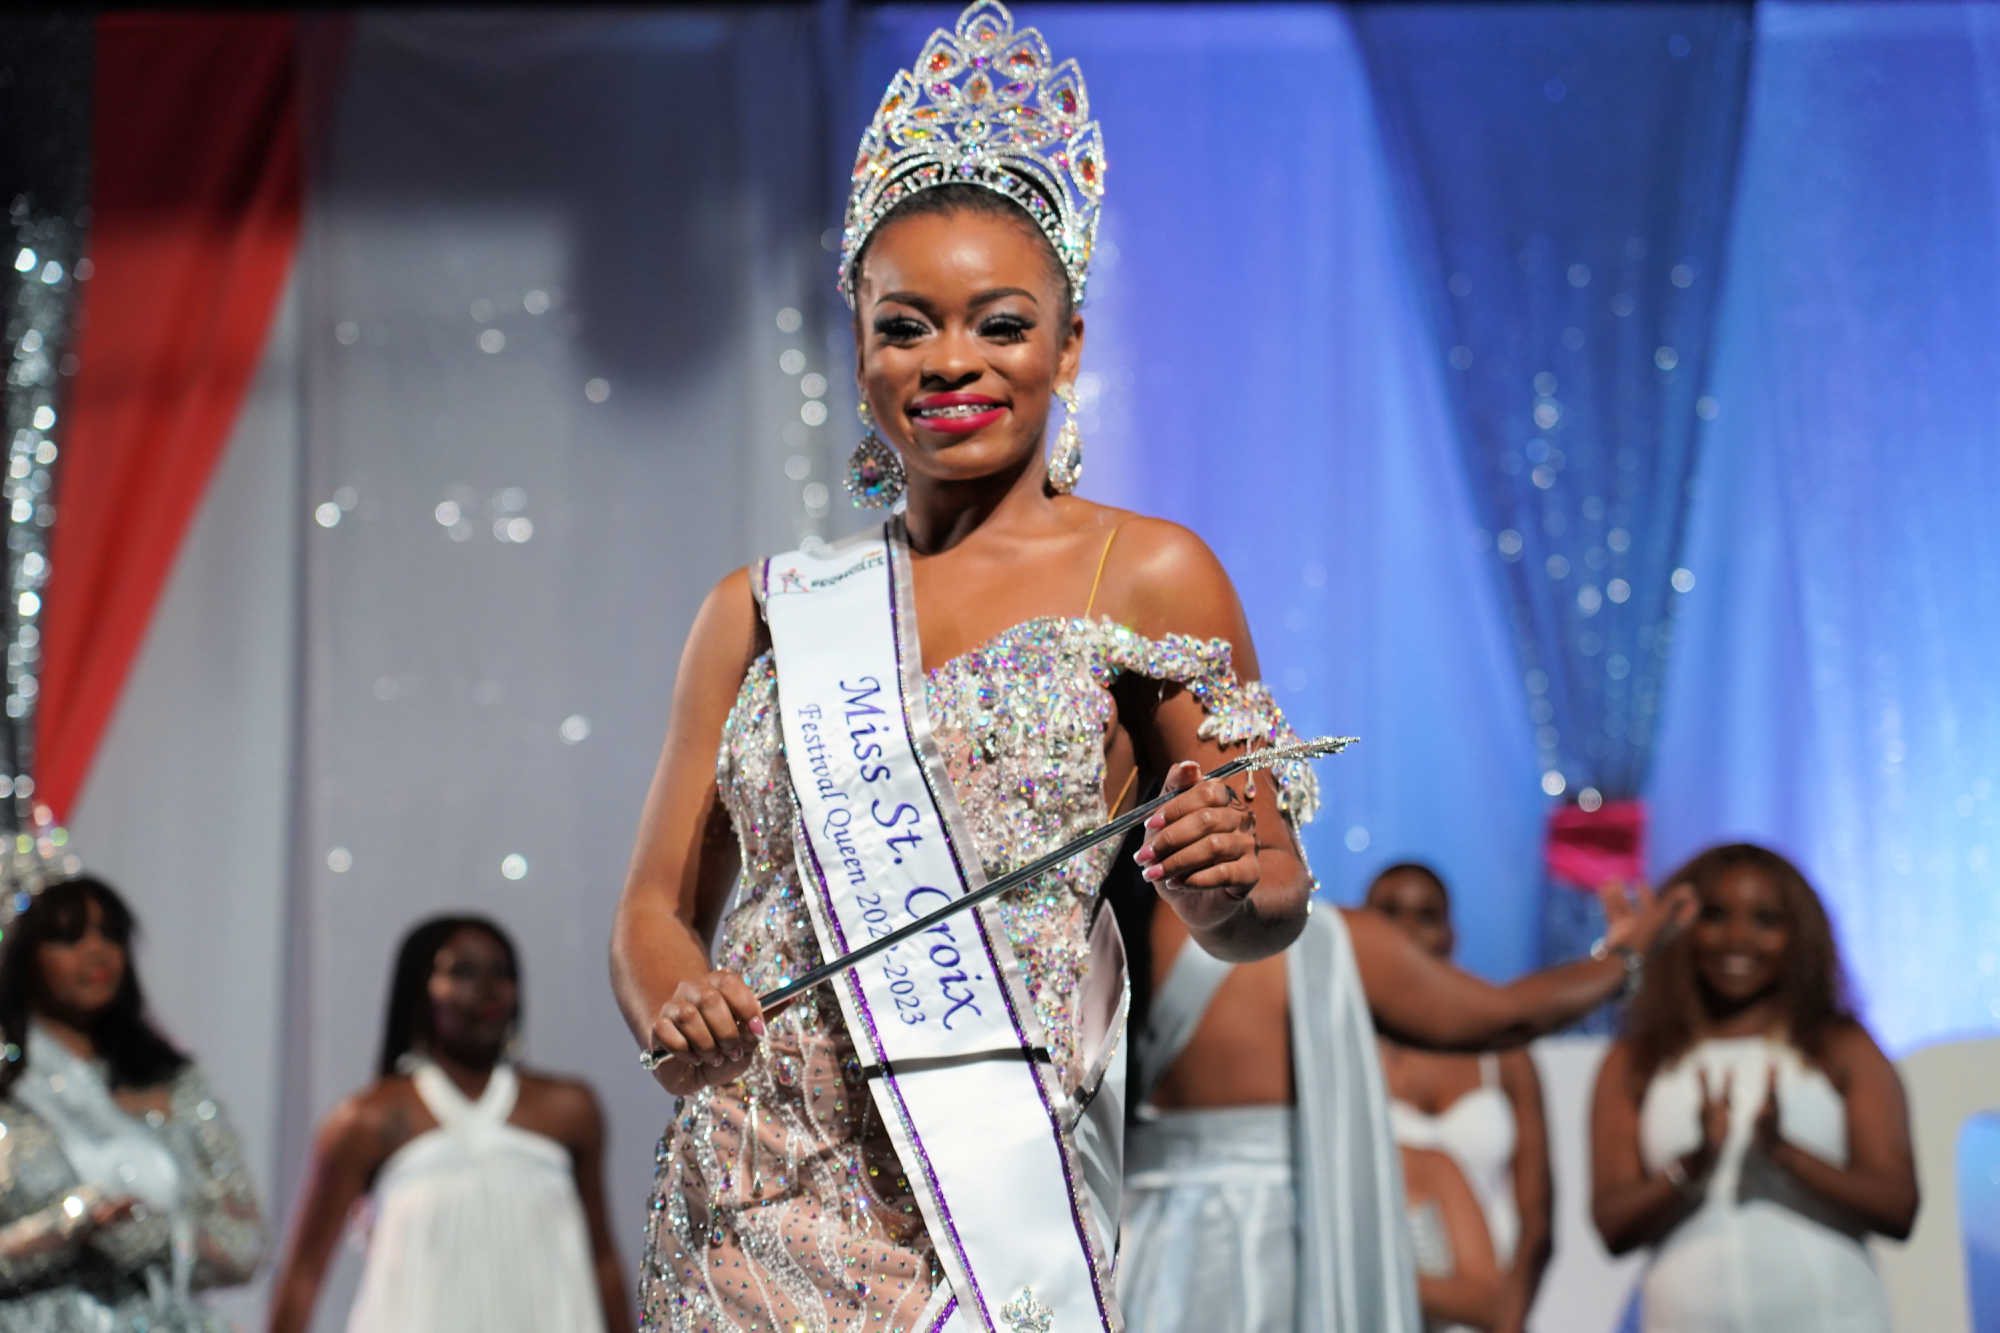 Rynel Harris Crowned Miss St. Croix 20222023 in First Queen Show Since